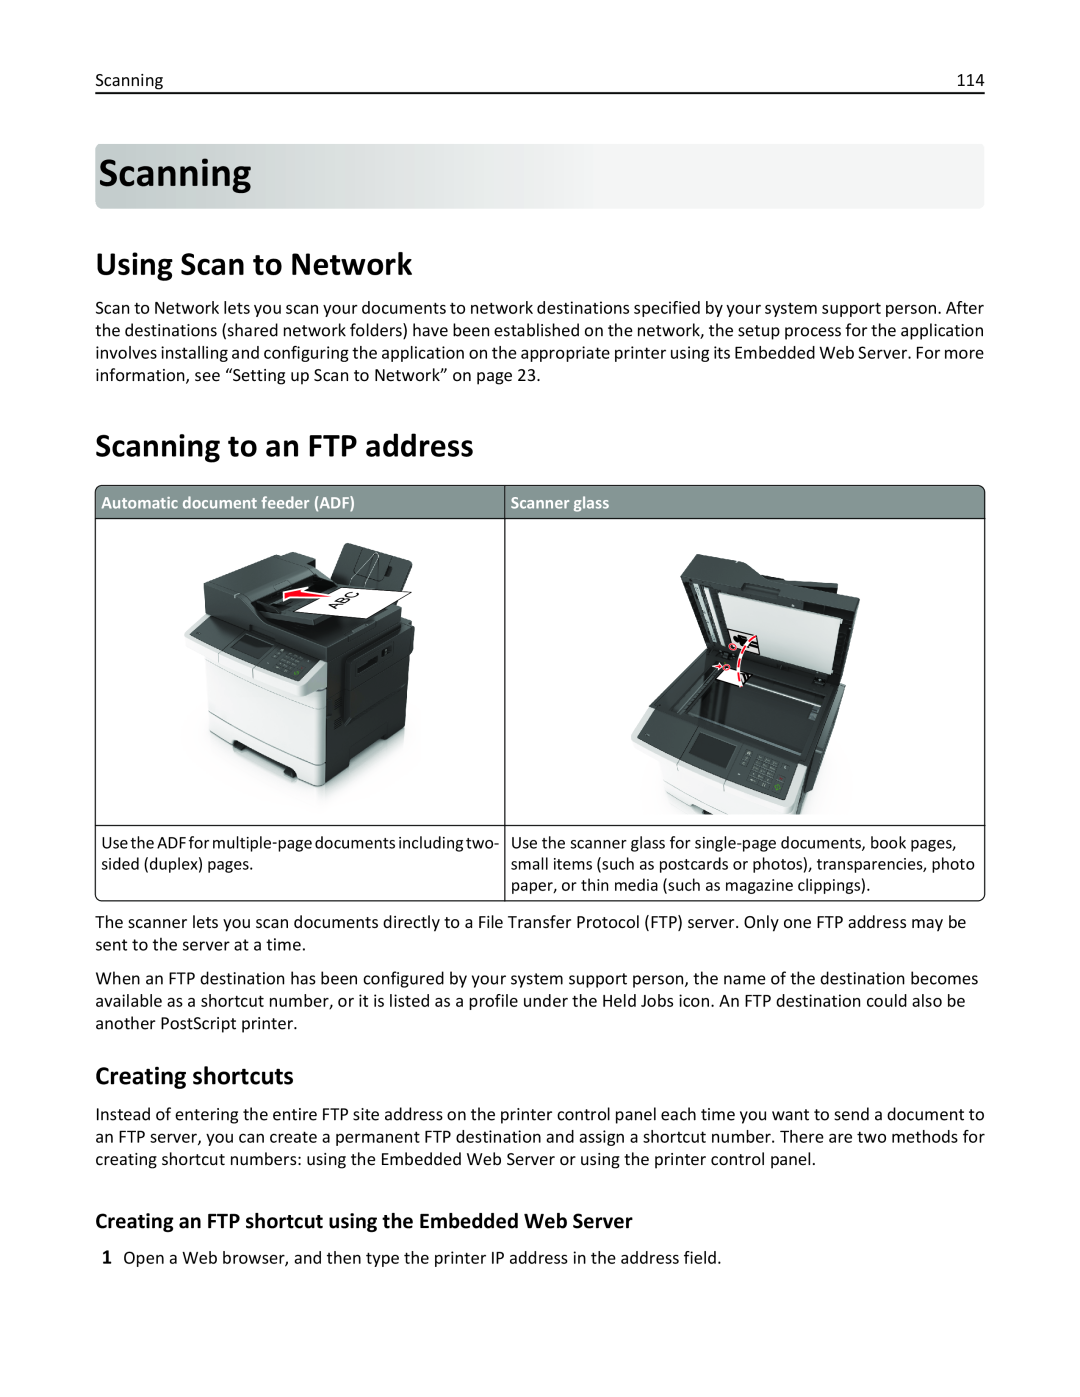 Lexmark 436 manual Using Scan to Network, Scanning to an FTP address, Creating shortcuts 